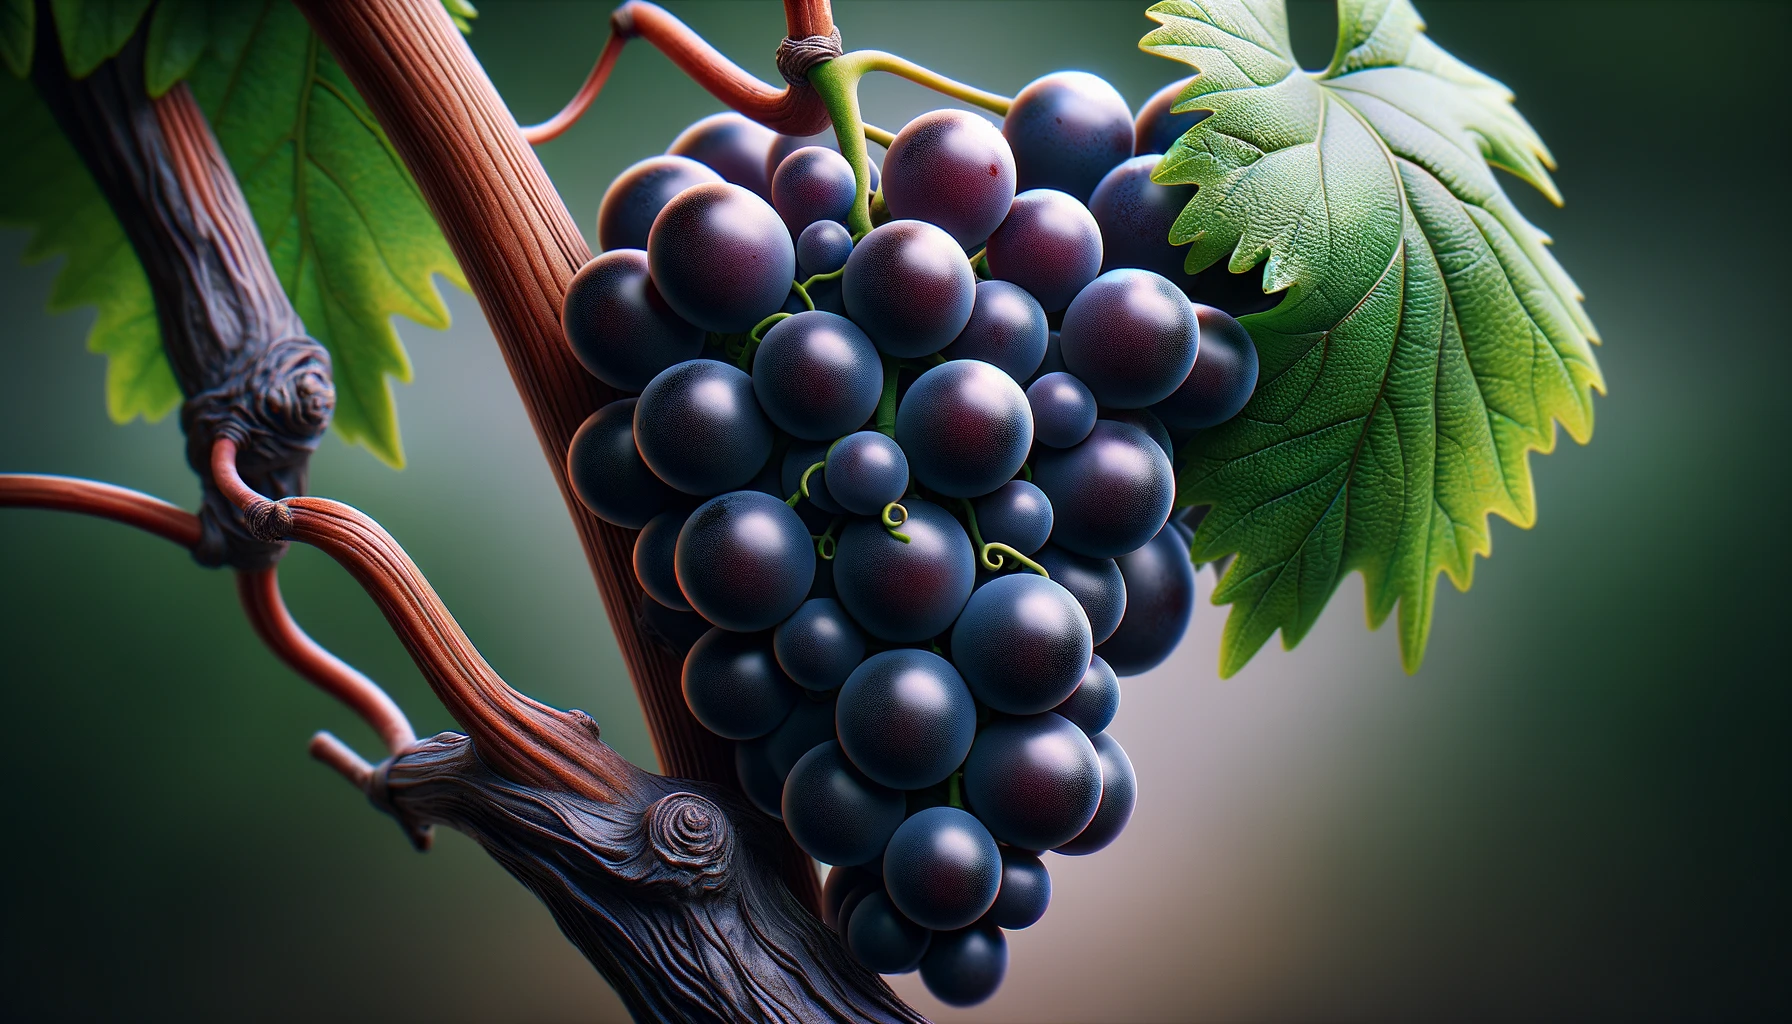 DALL·E 2024-05-23 11.10.09 - Close-up, photorealistic stock image of Malbec grapes, focusing on a cluster of ripe Malbec grapes with deep, dark purple skins, attached to the vine